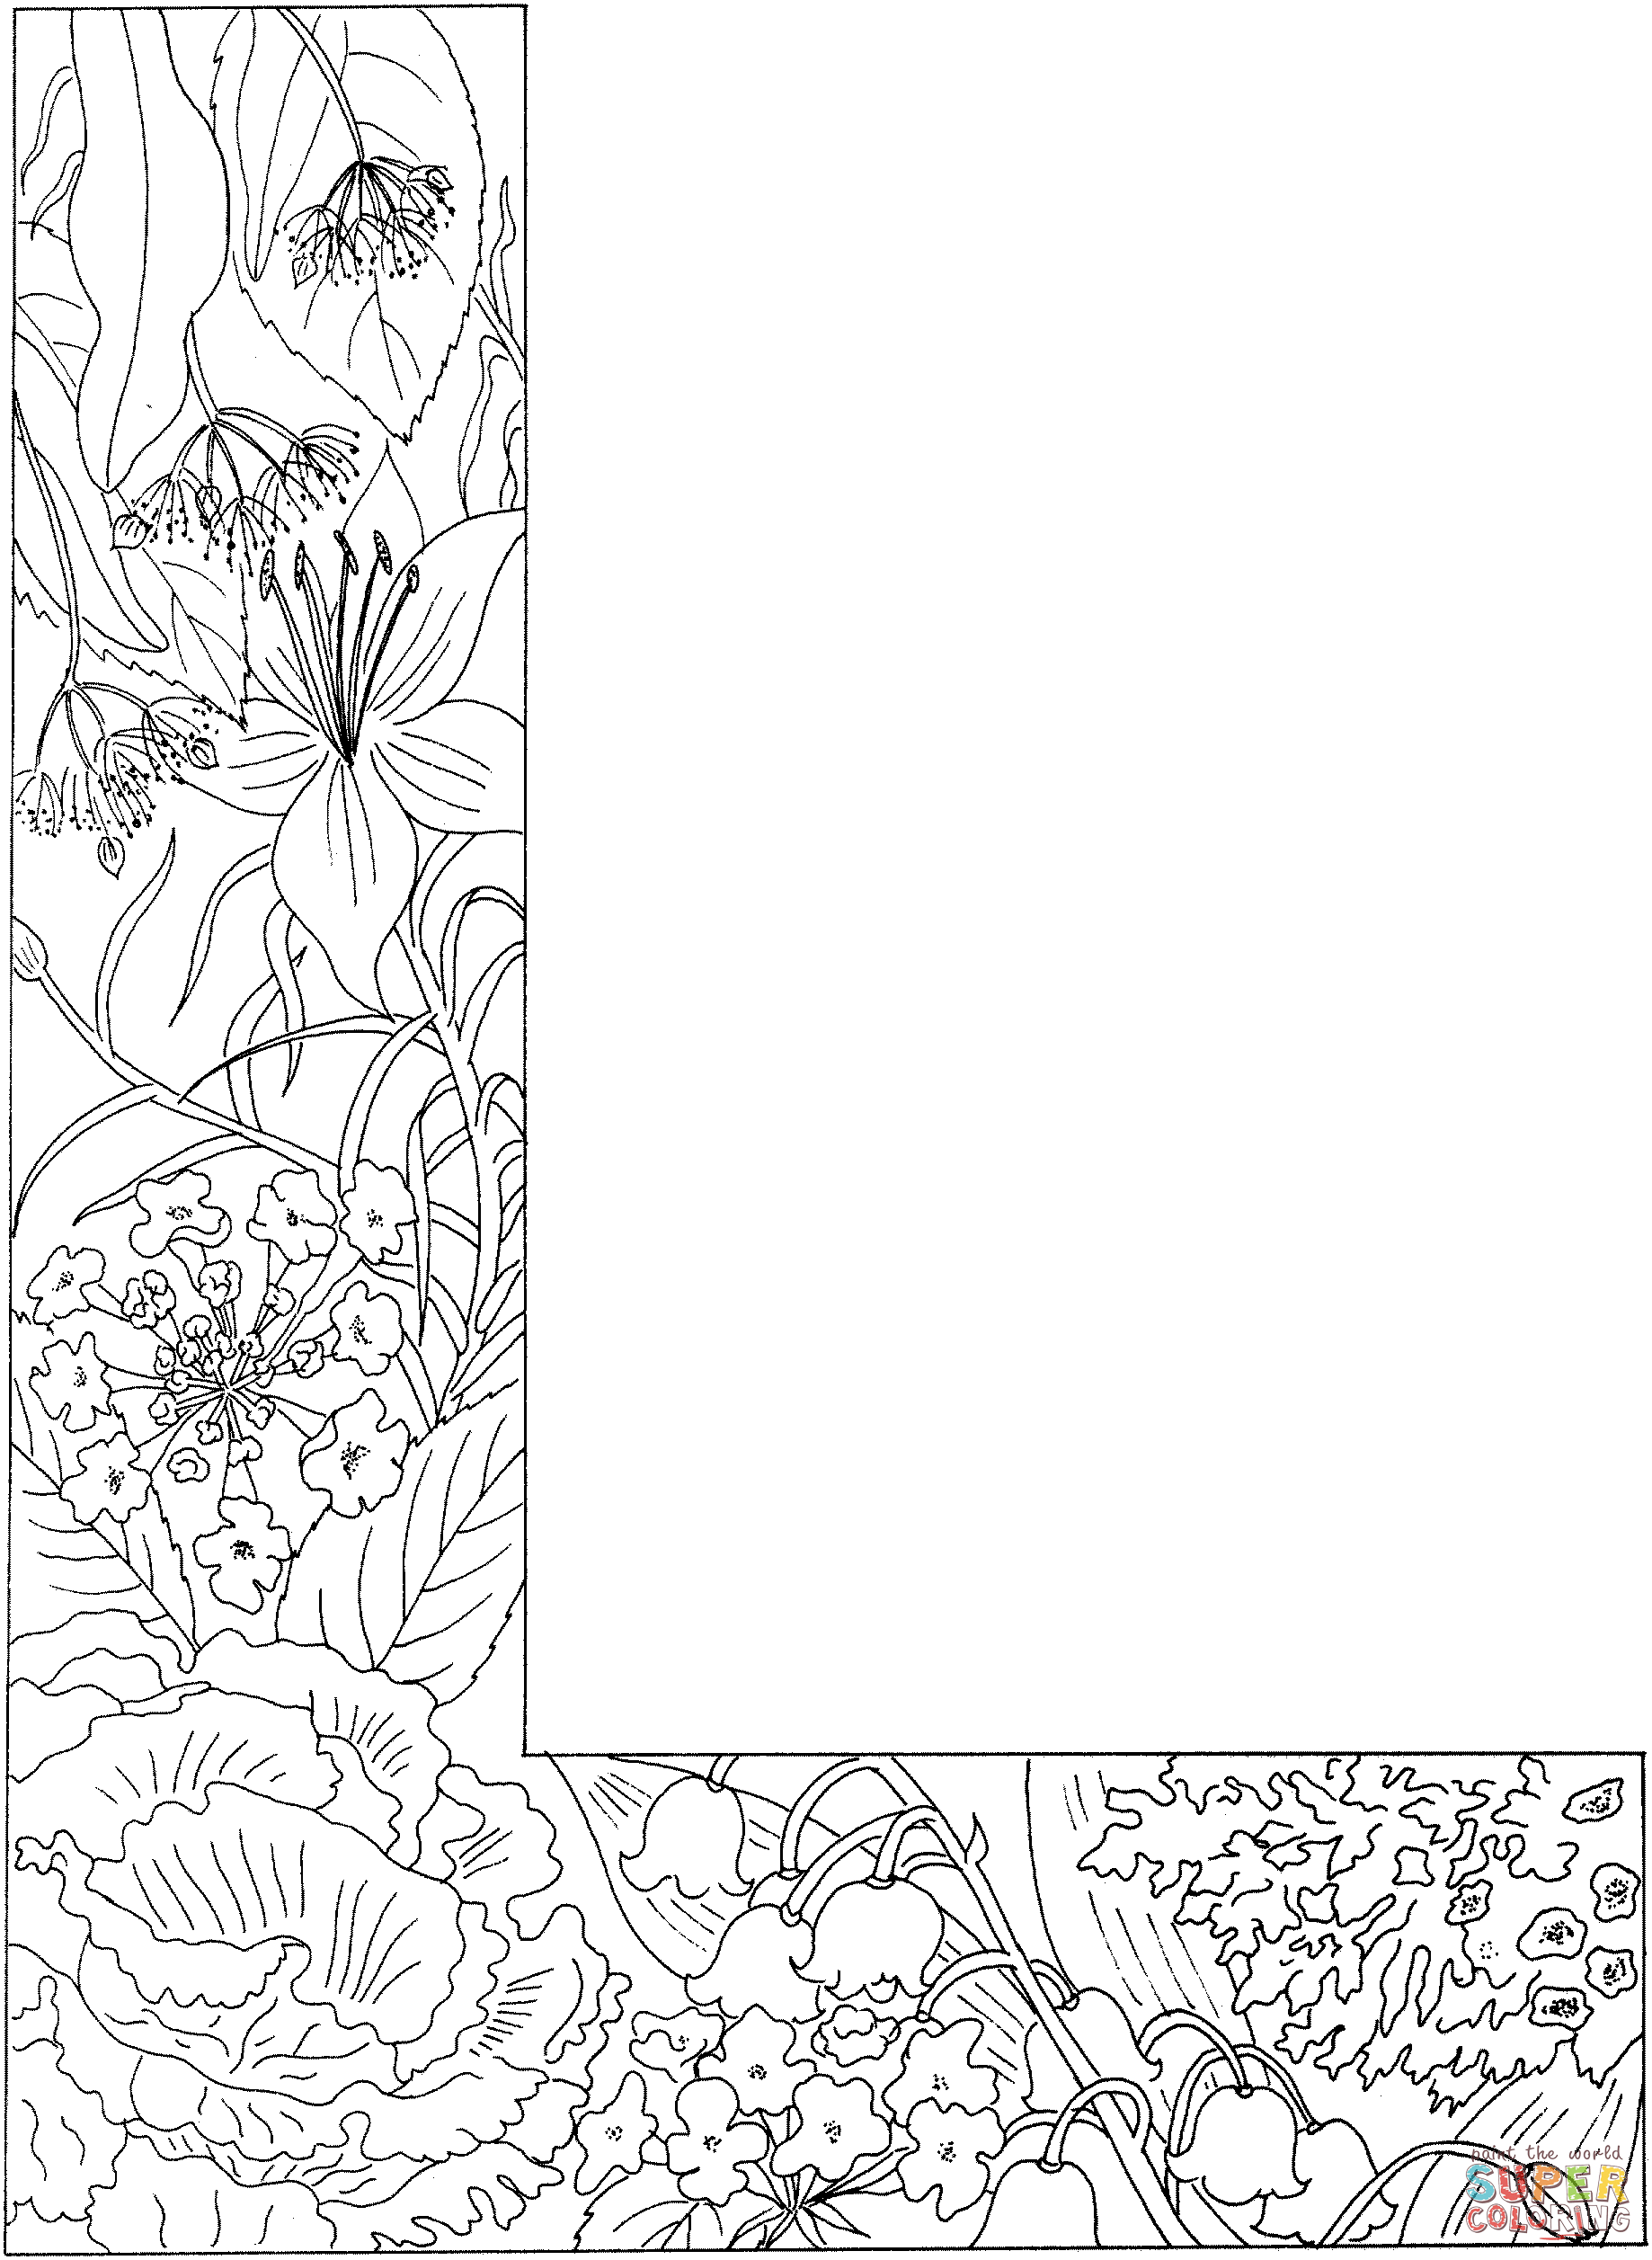 Letter L coloring page | Free Printable Coloring Pages